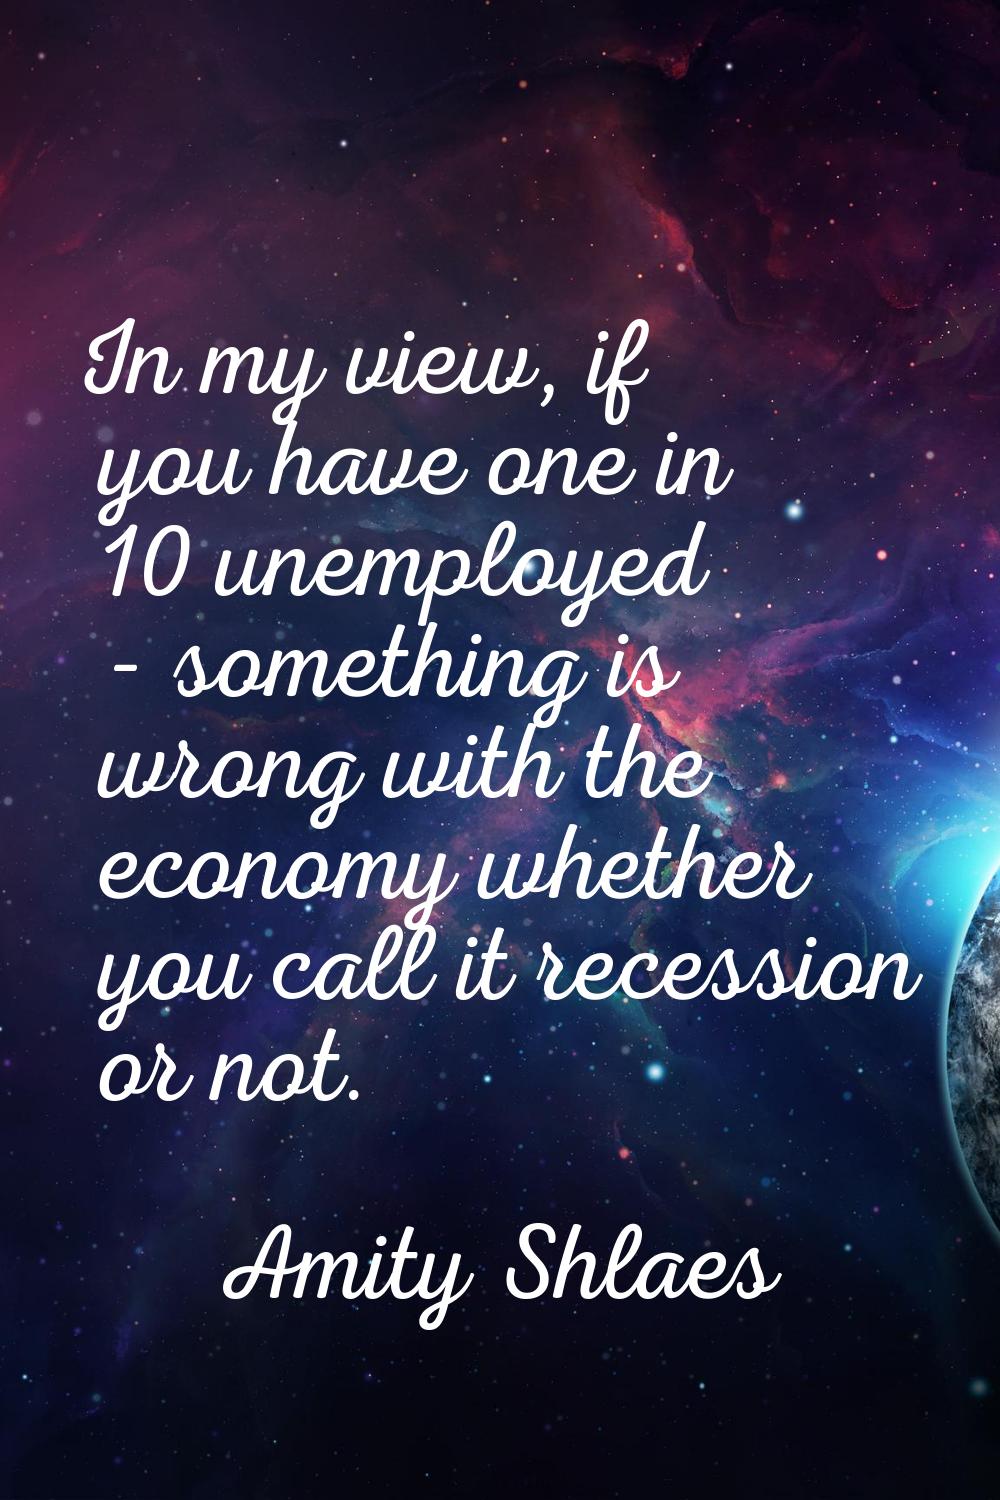 In my view, if you have one in 10 unemployed - something is wrong with the economy whether you call